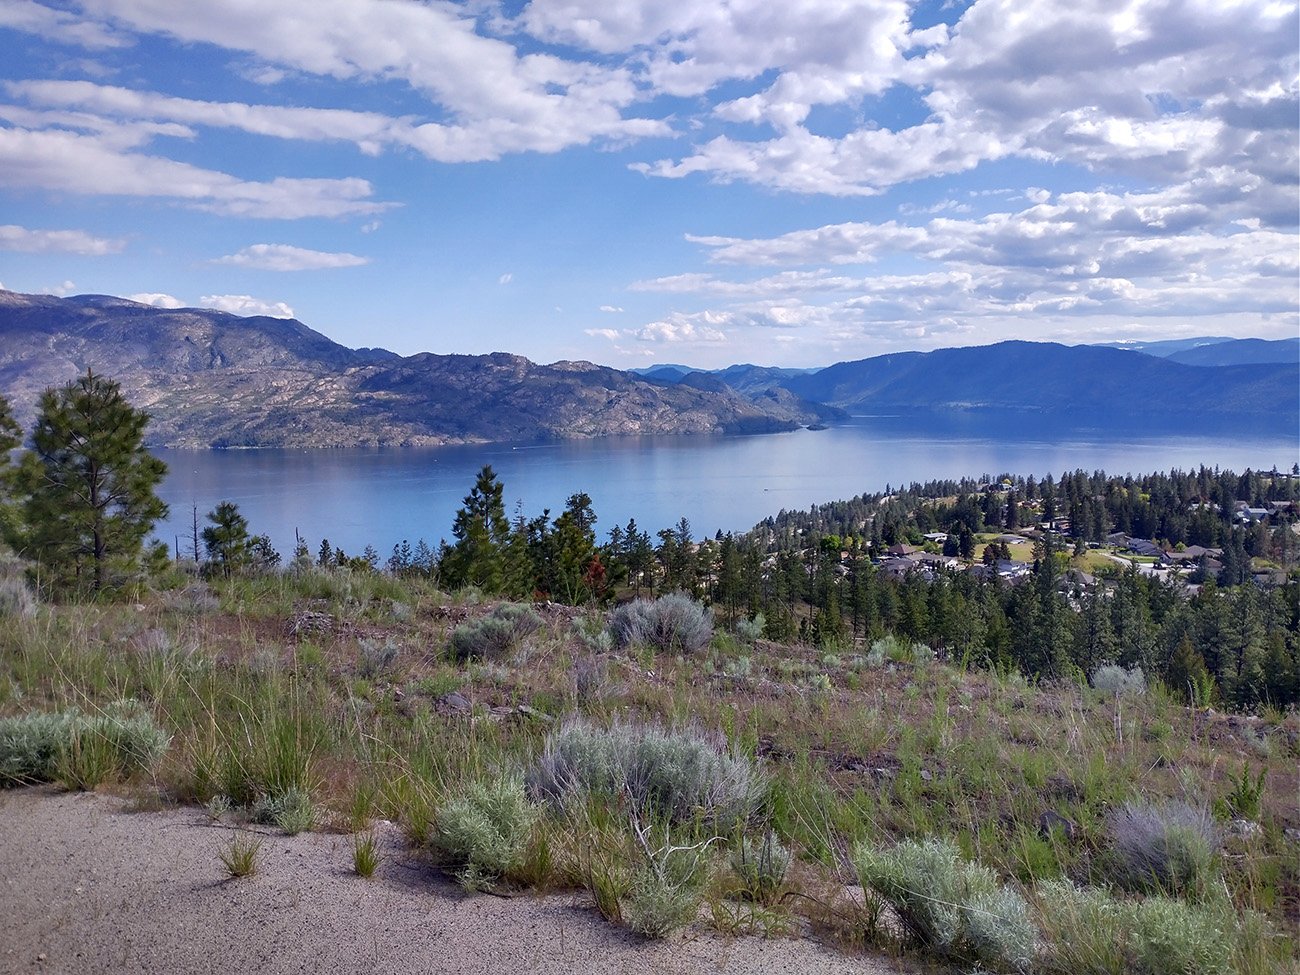 The view of Lake Okanagan from the bottom of the pass. No more oceans here! 